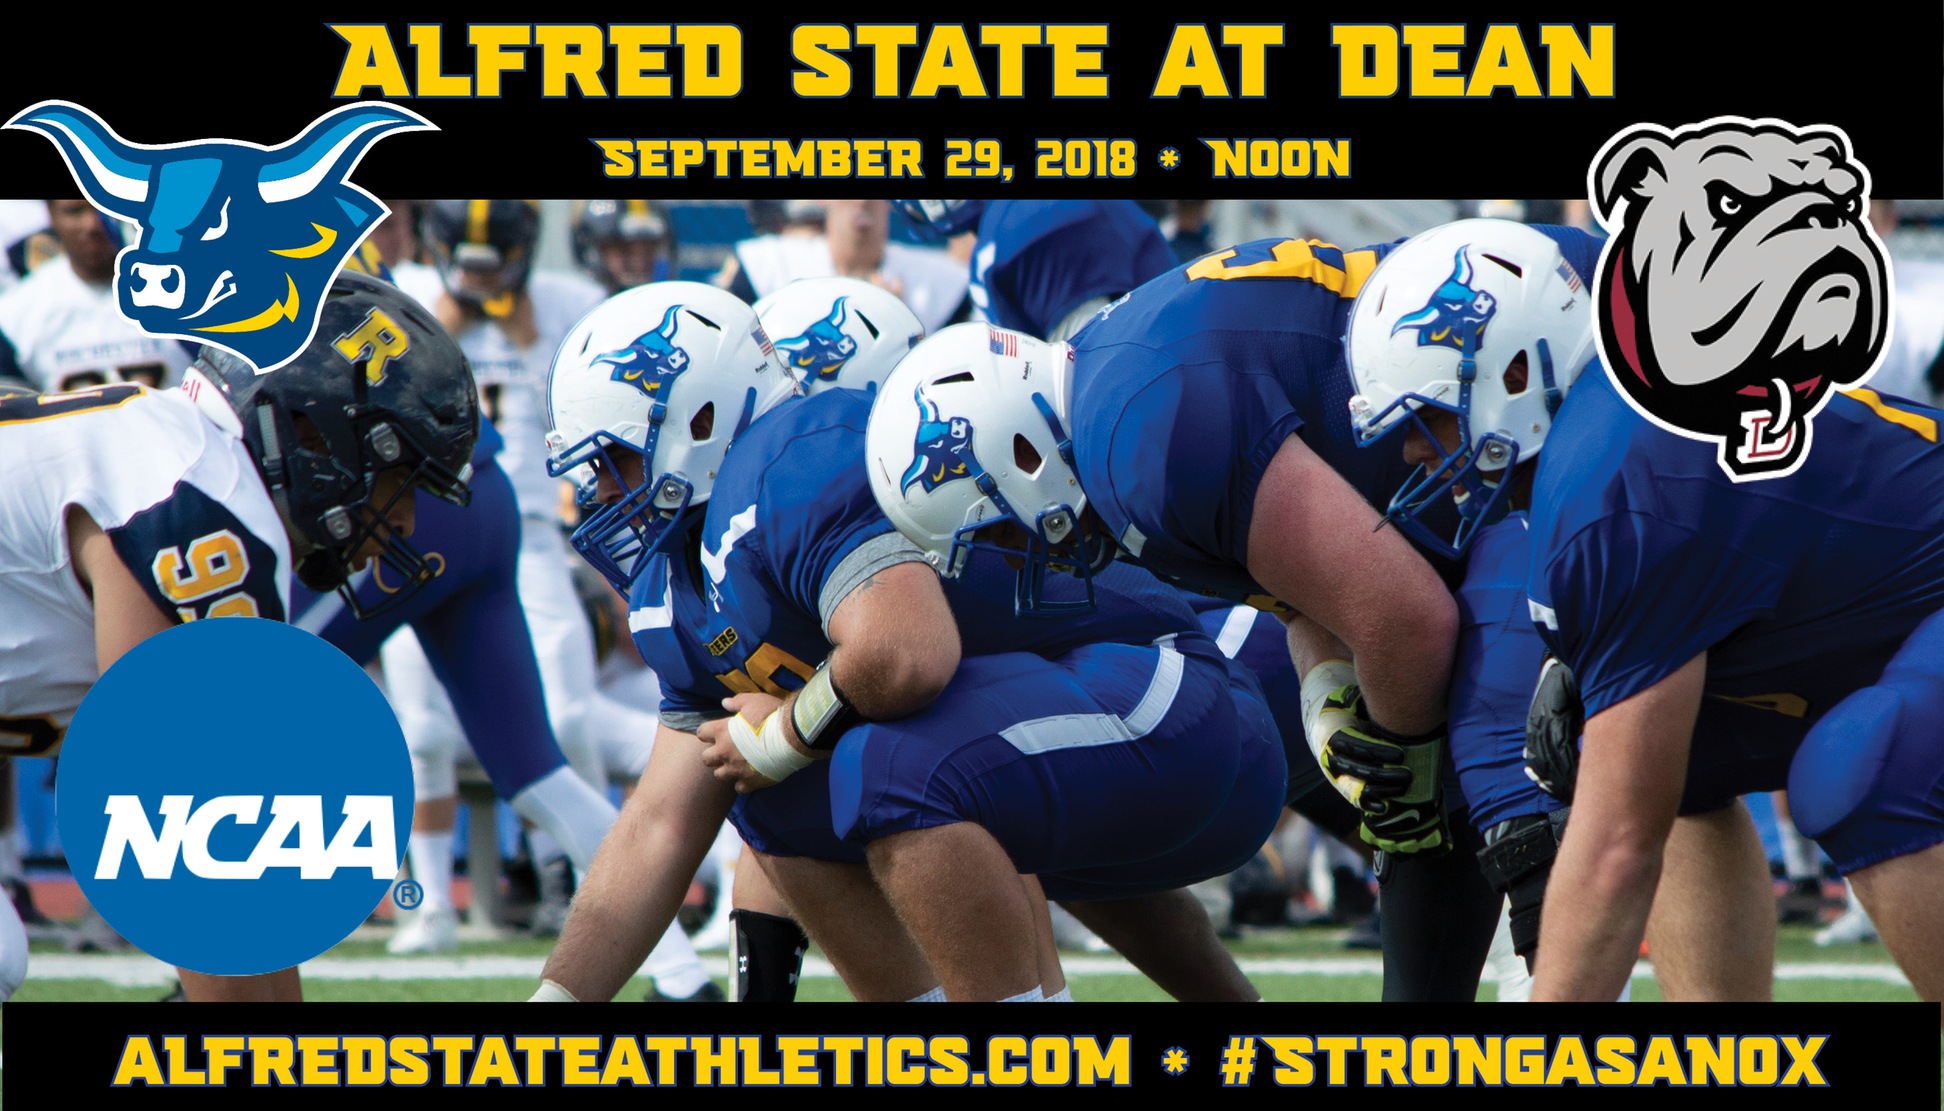 Alfred State travels to Dean to open ECFC play